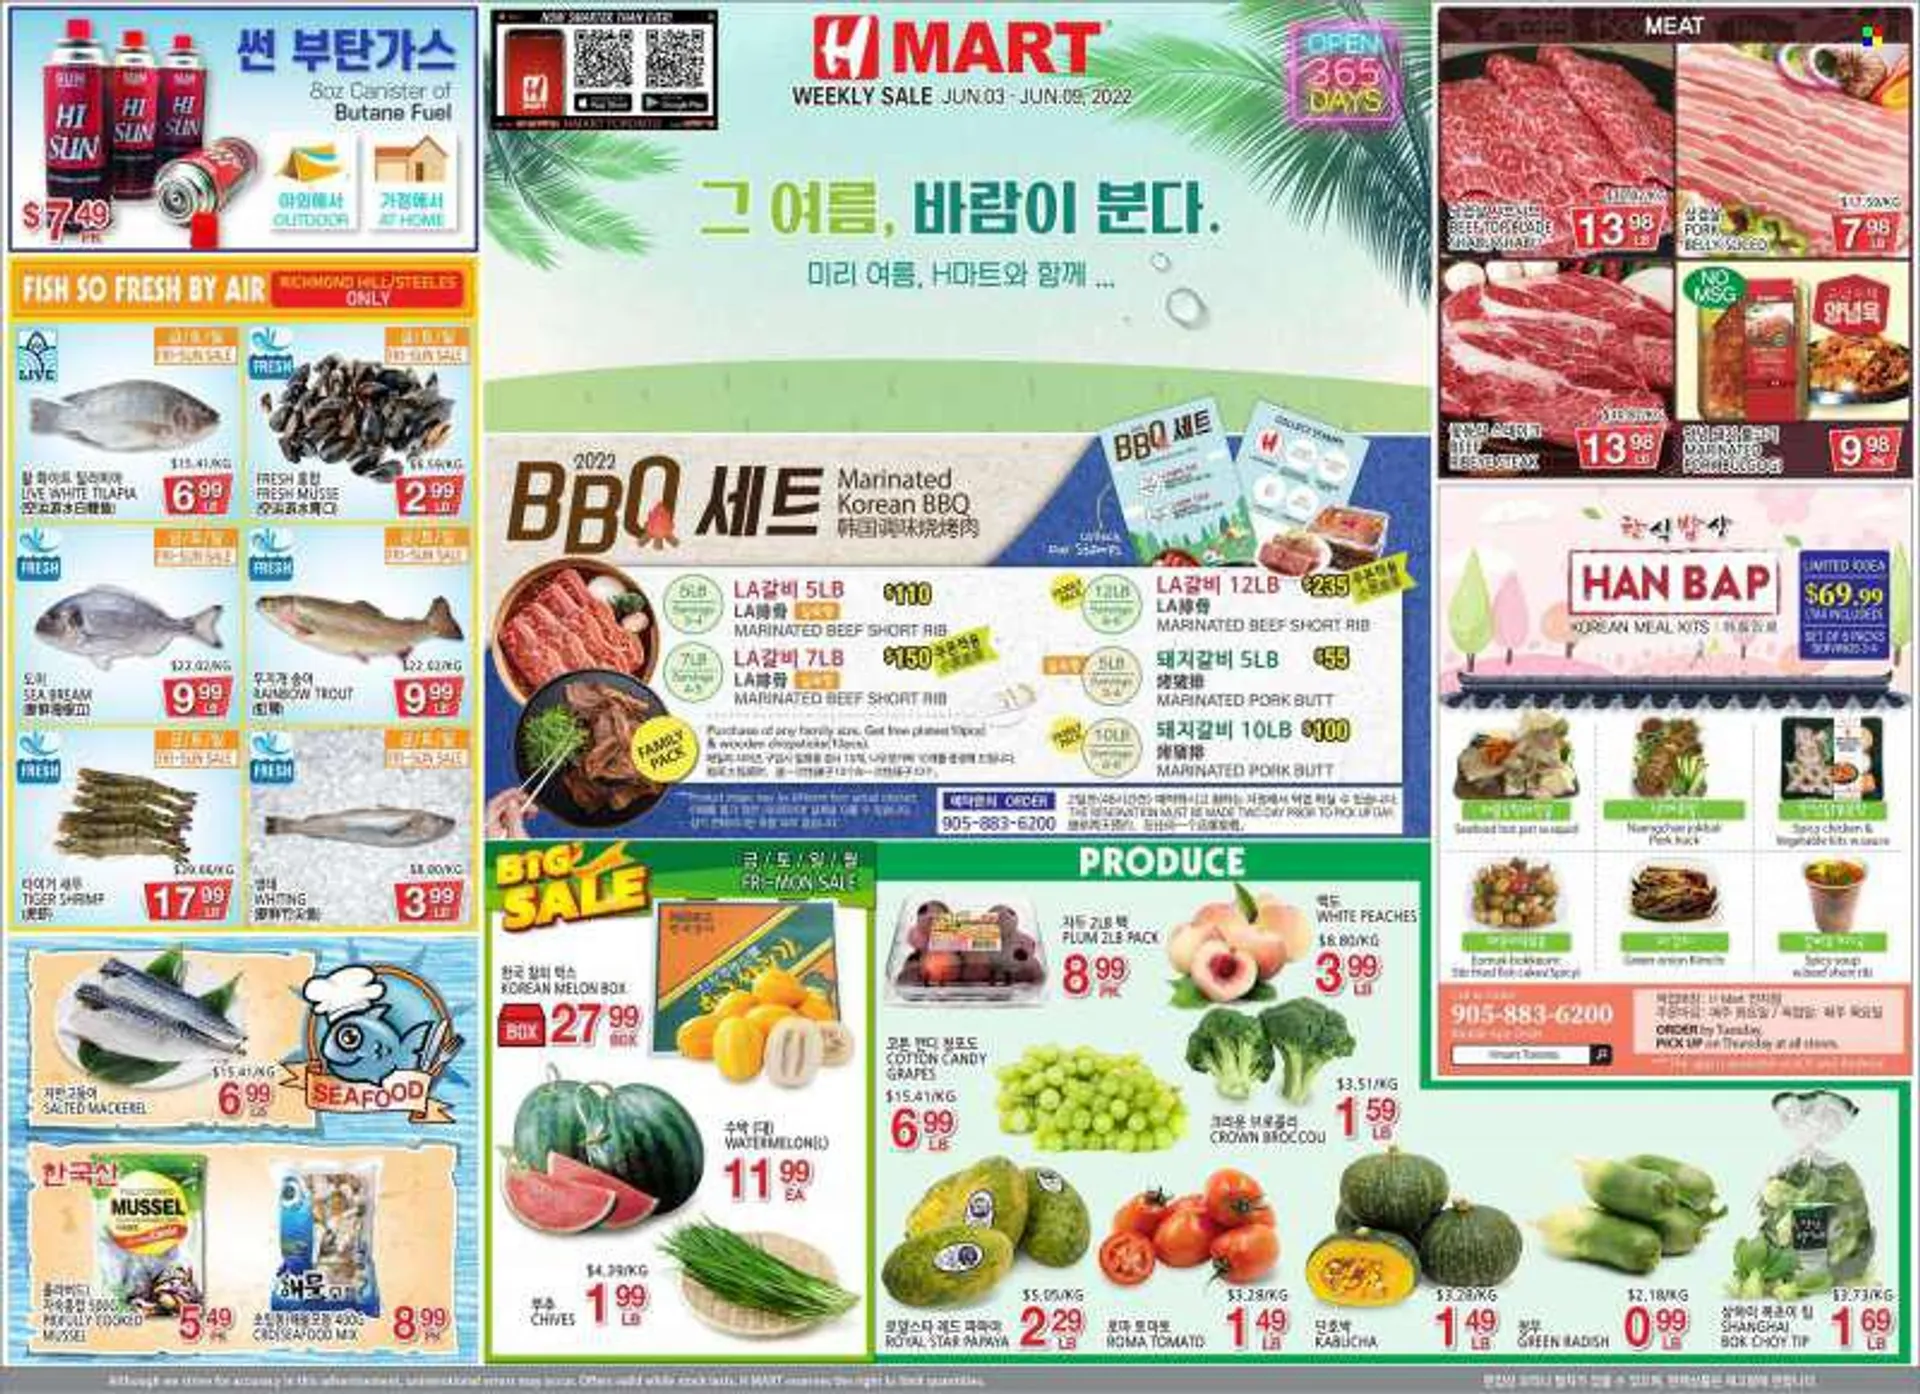 H Mart Flyer - June 03, 2022 - June 09, 2022. from June 3 to June 9 2022 - flyer page 1